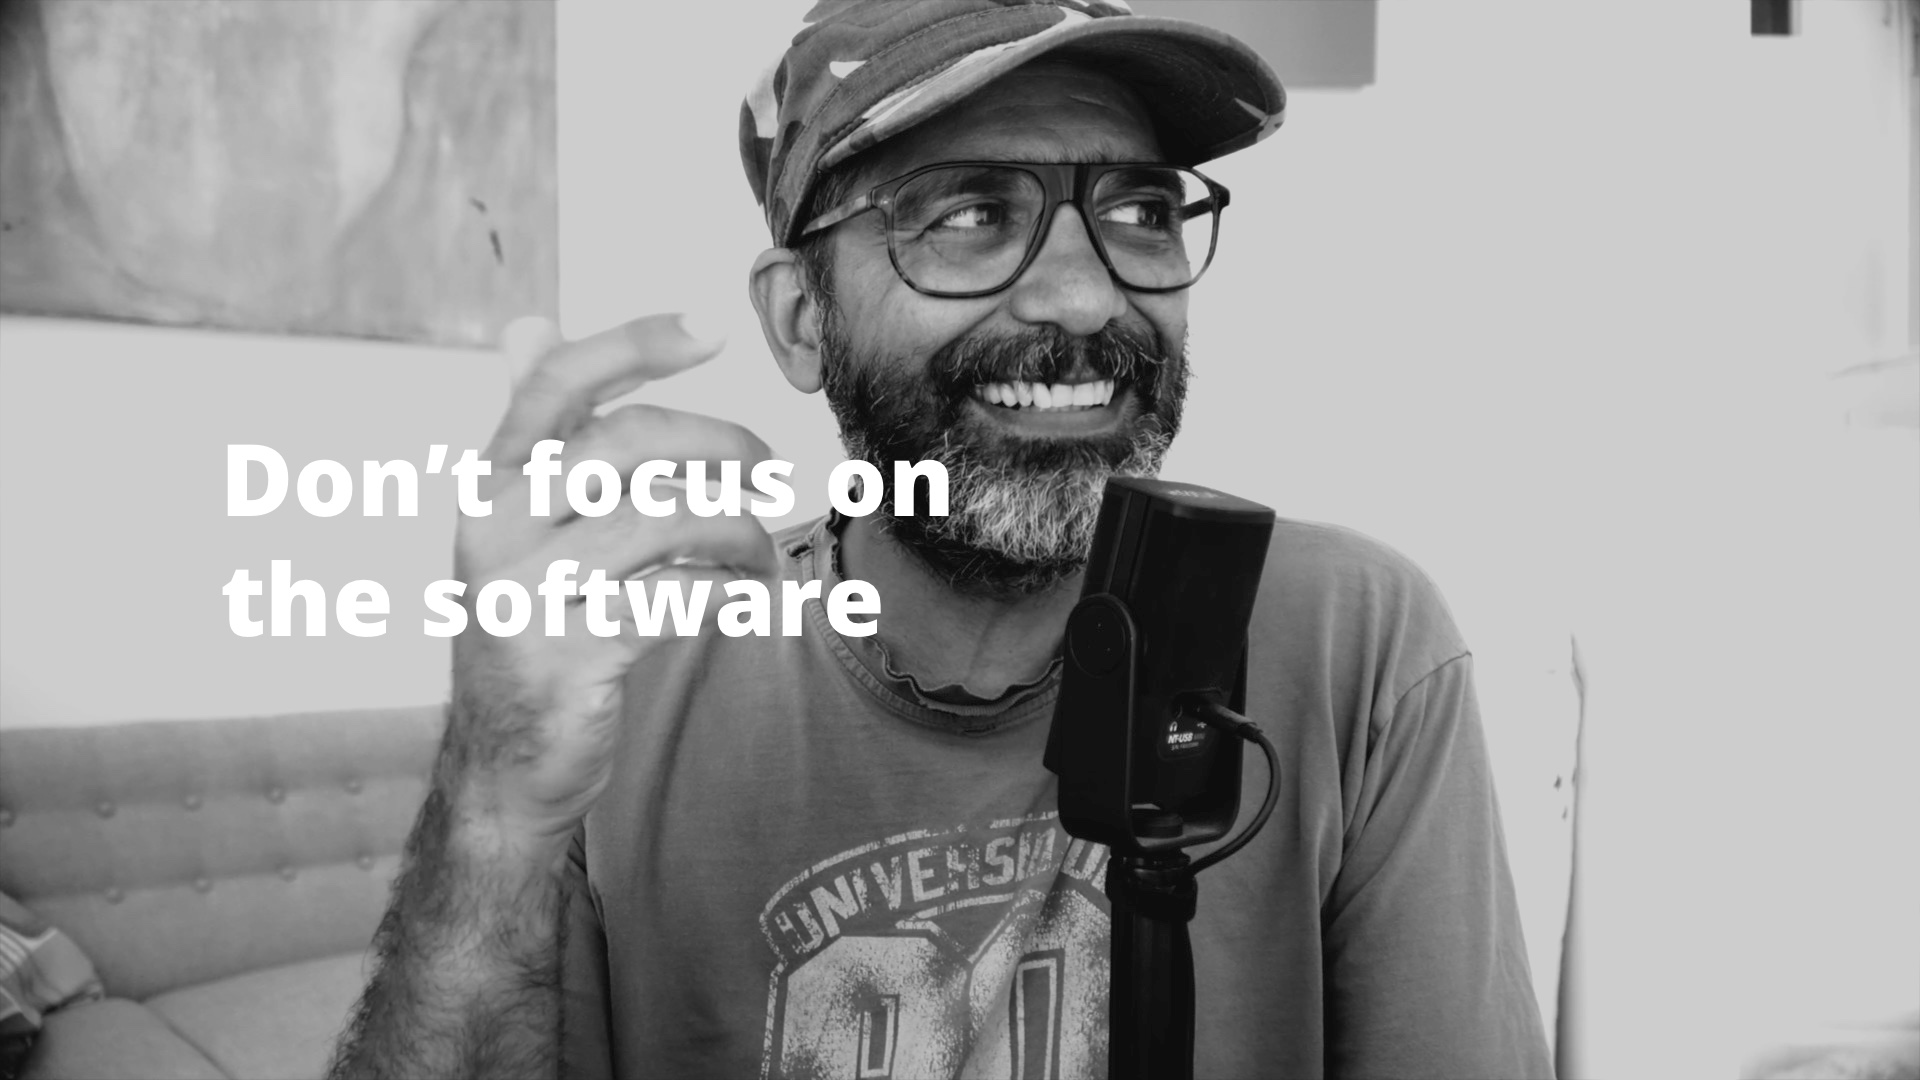 Don’t focus on the software